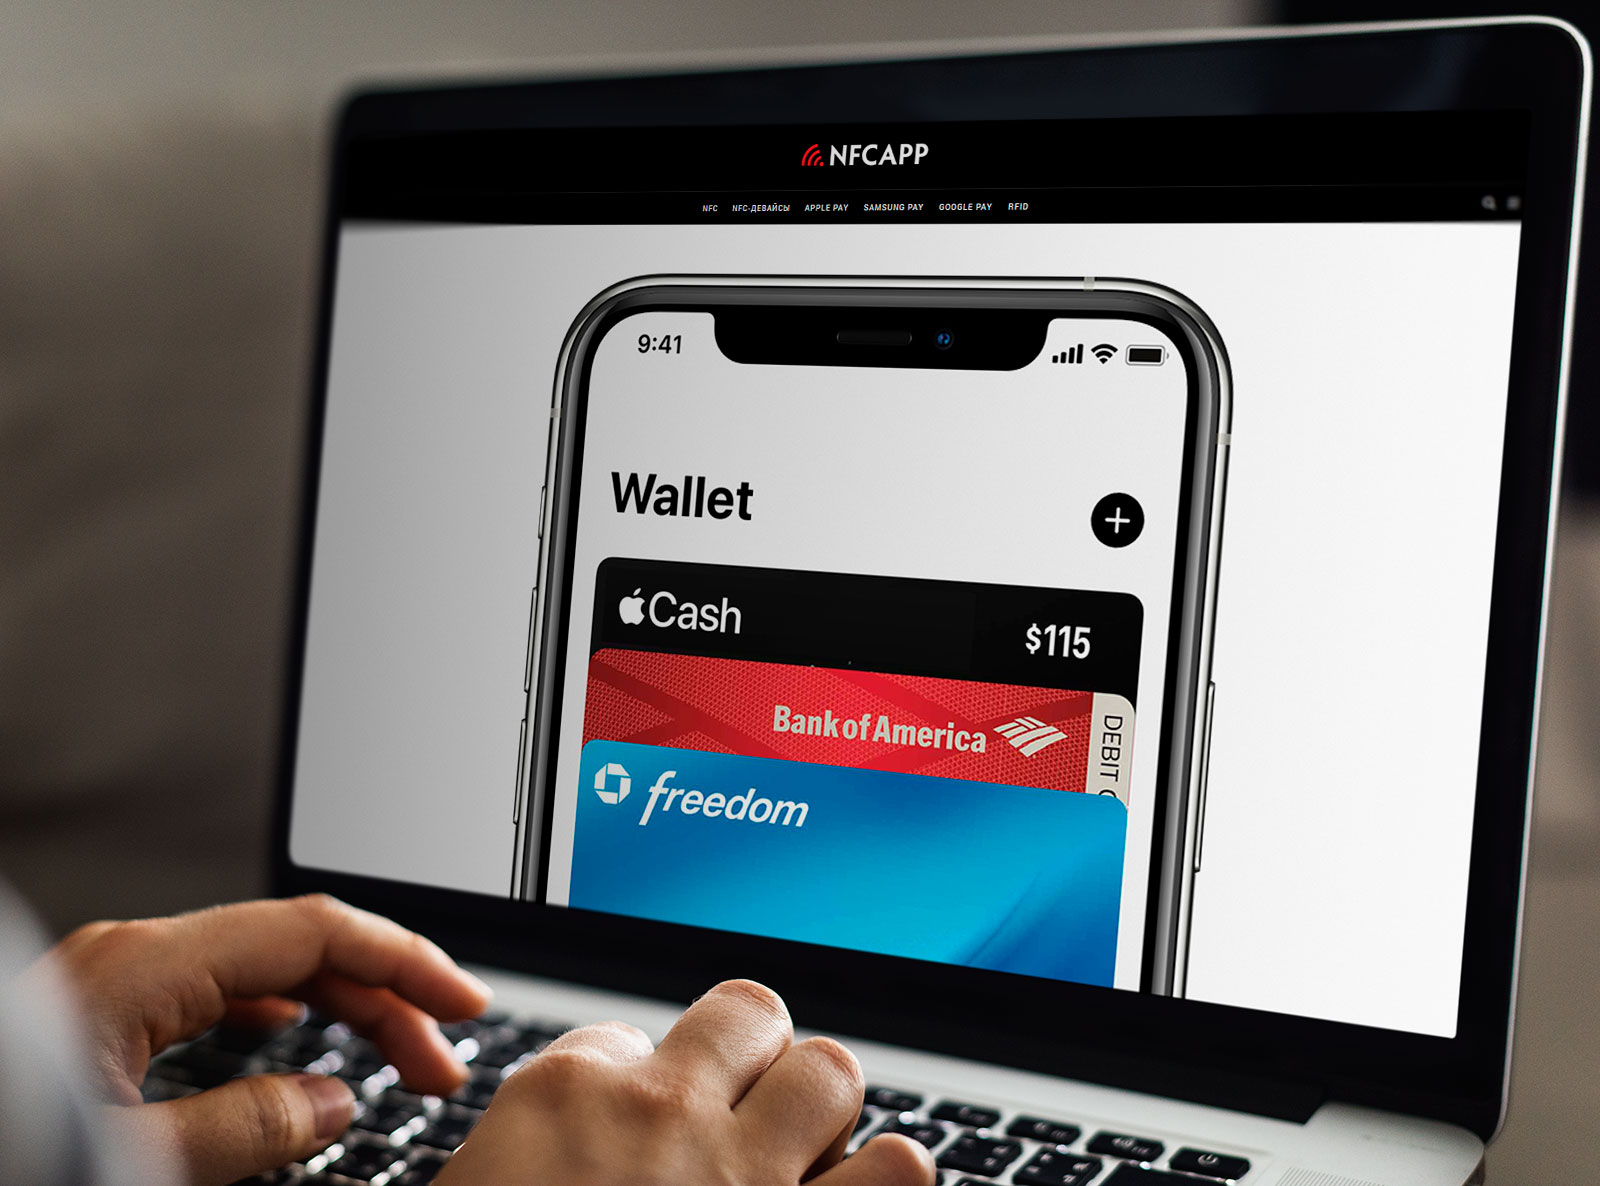 Best Loyalty Cards For Apple Wallet